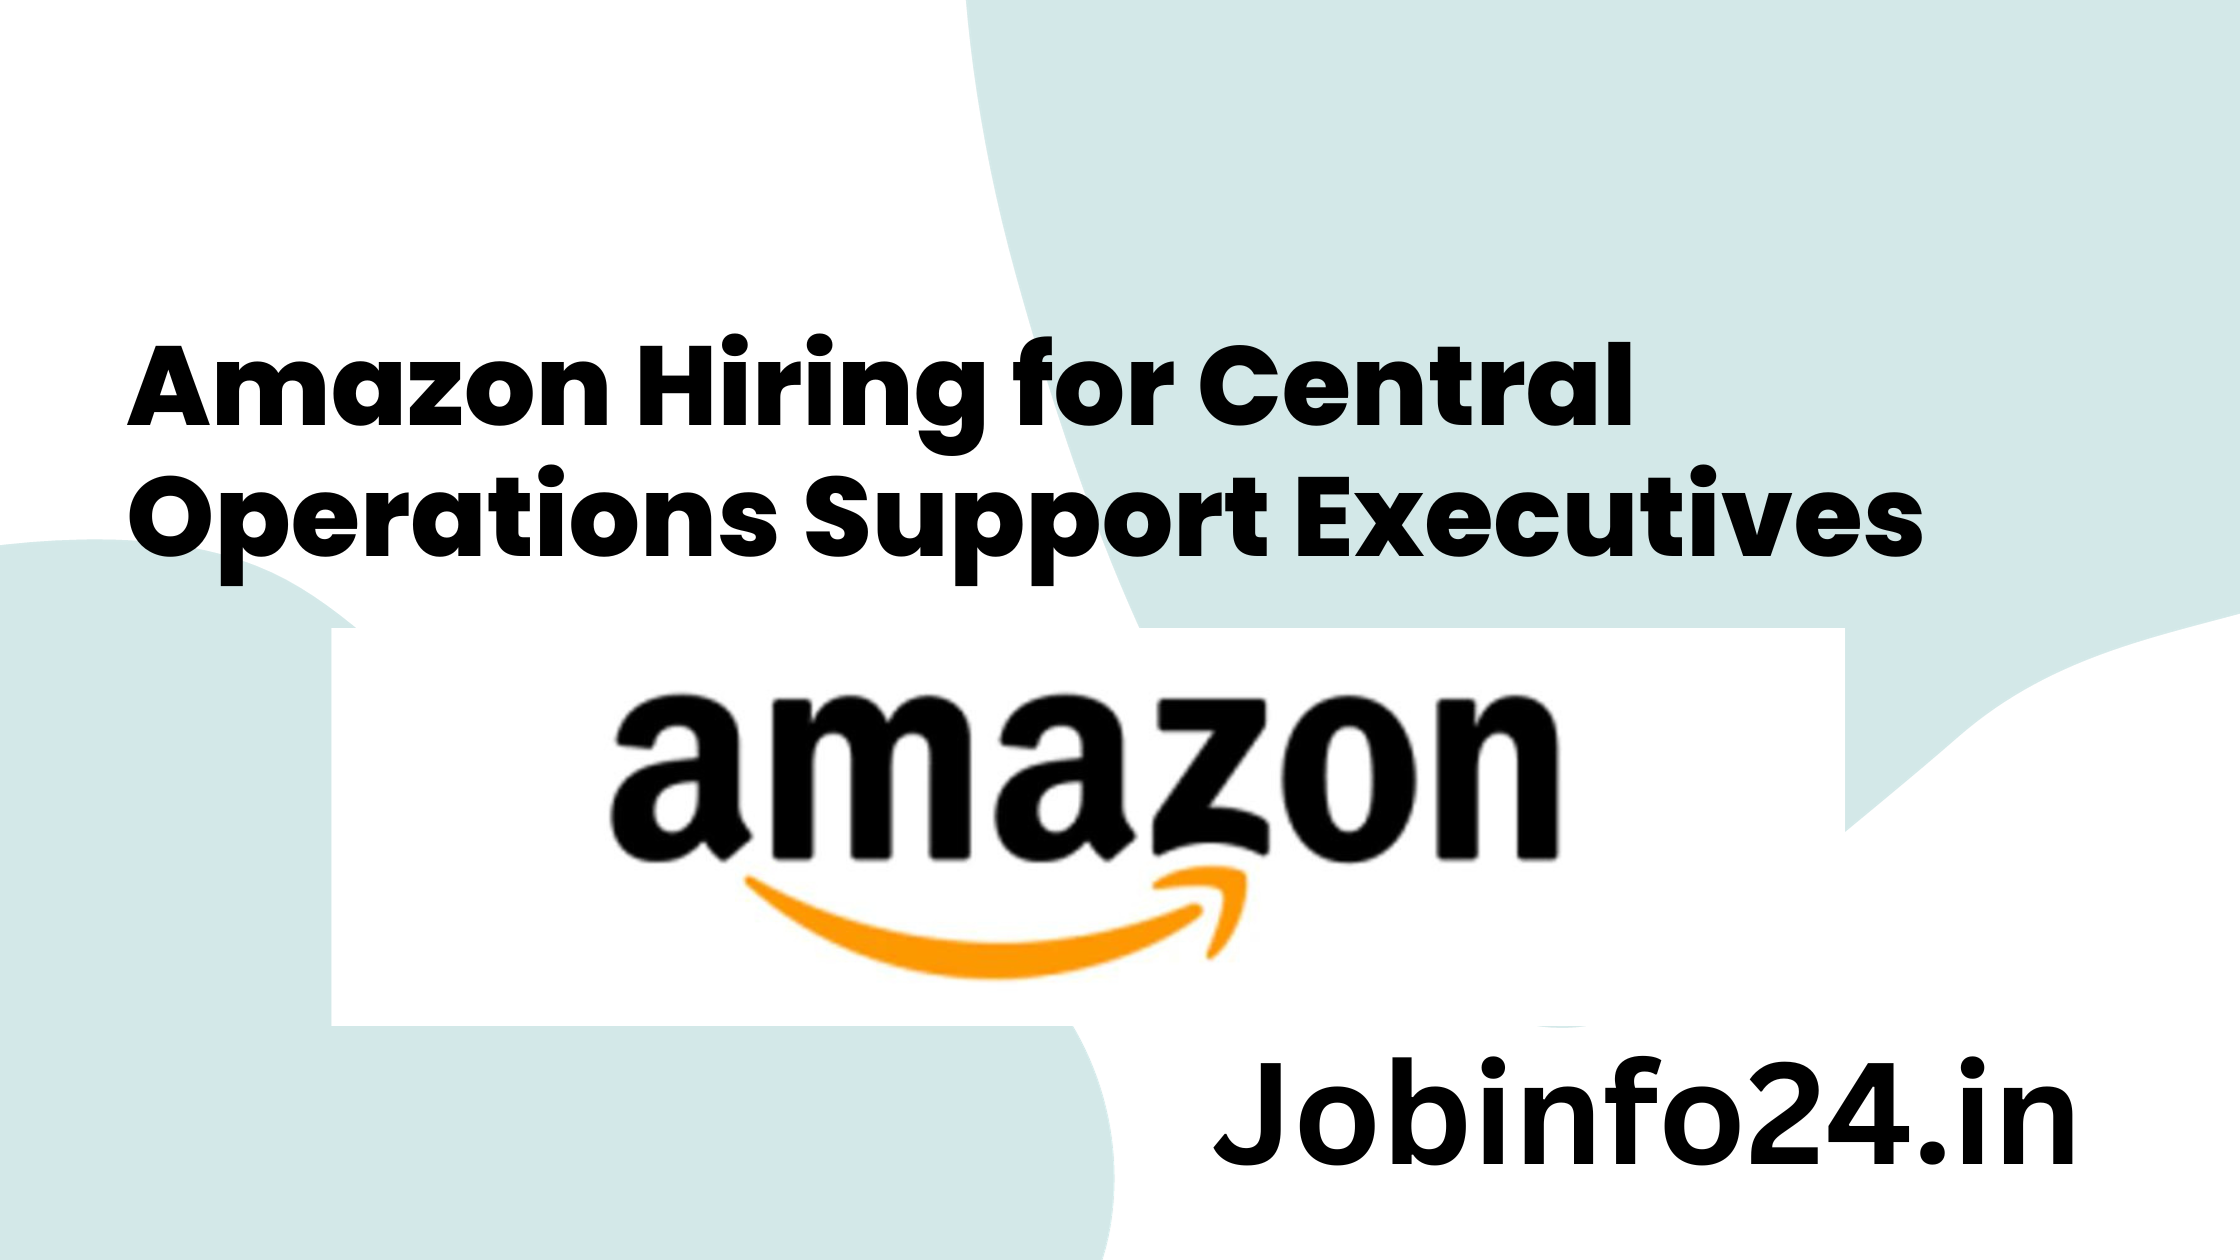 Amazon Hiring for Central Operations Support Executives